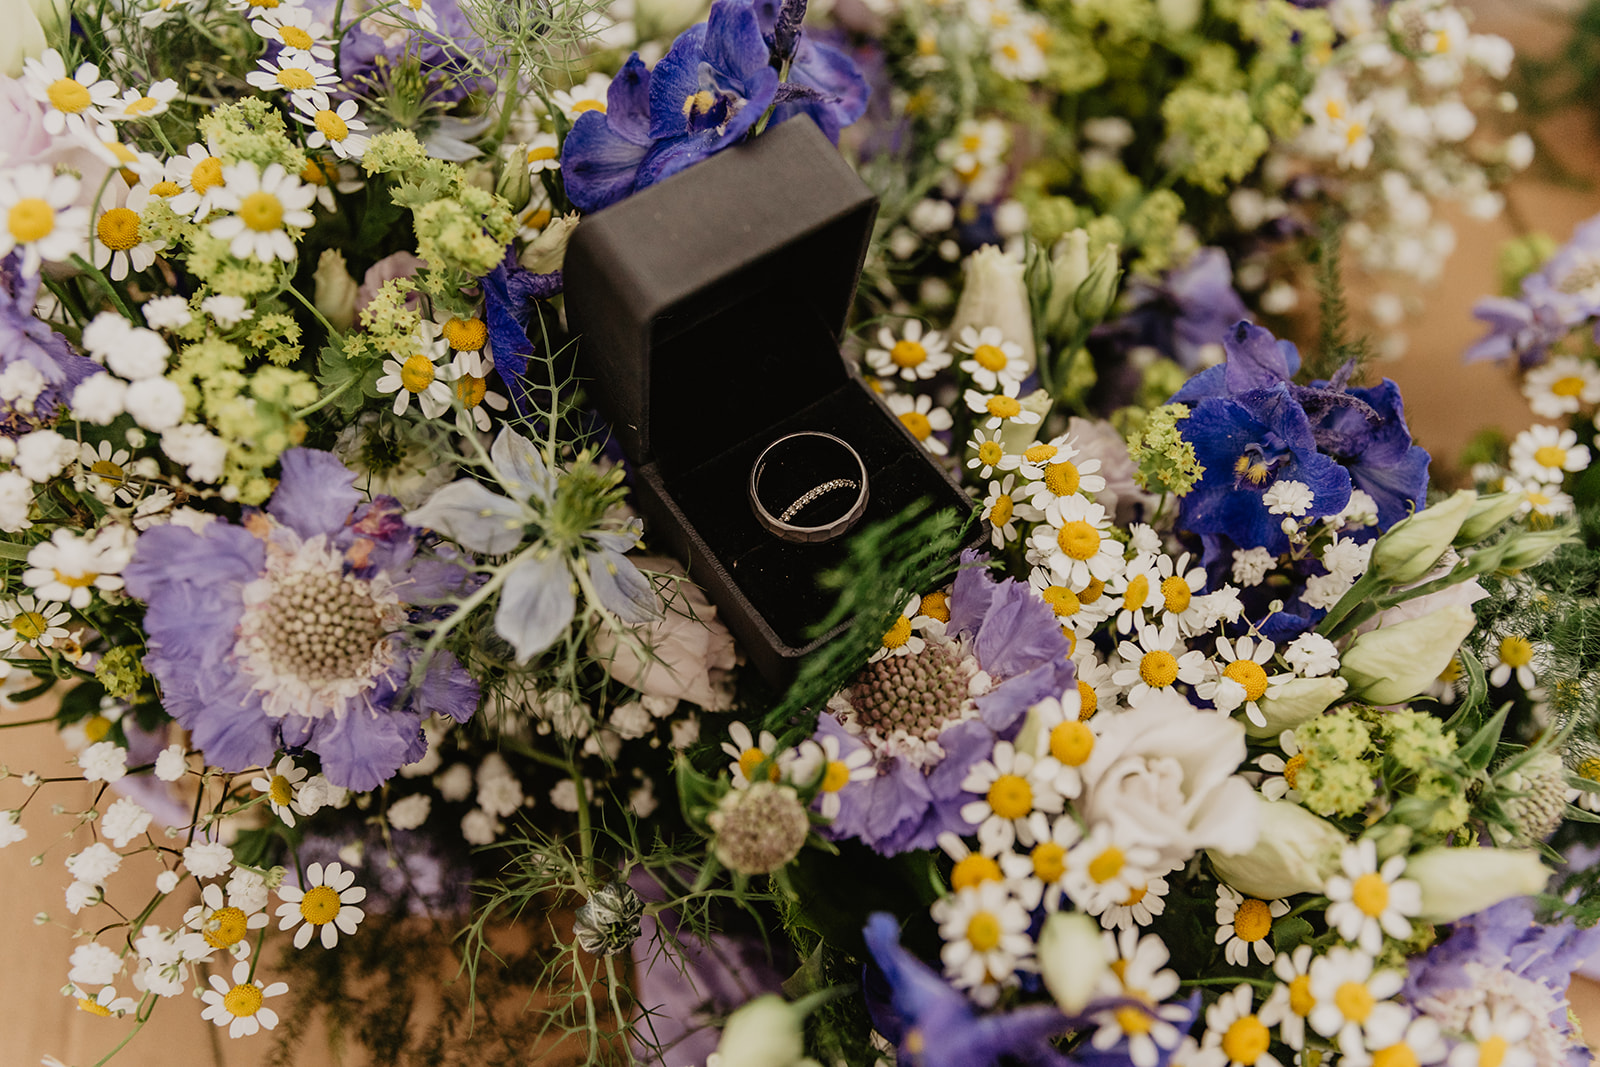 Wedding rings in bouquet at Field Place Wedding Worthing, Sussex. By OliveJoy Photography.